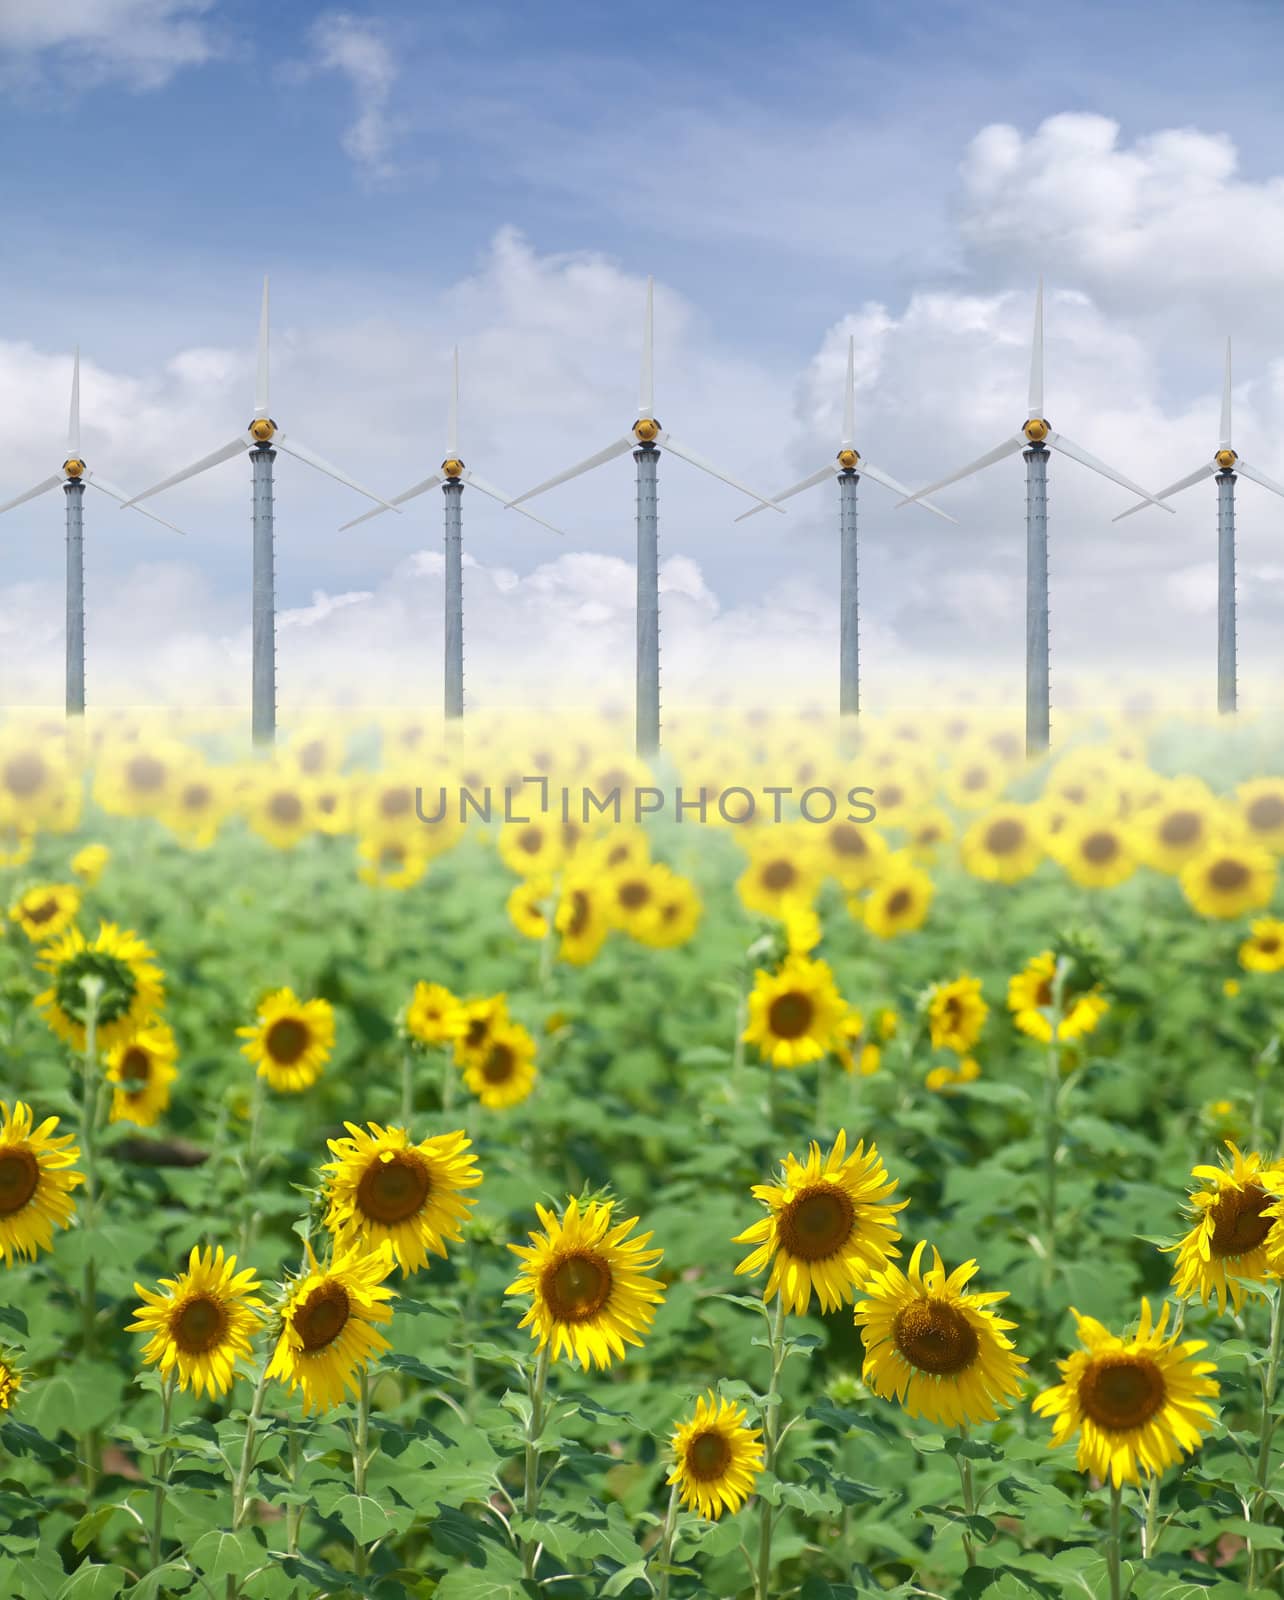 Alternative energy with sunflowers and pure fresh air